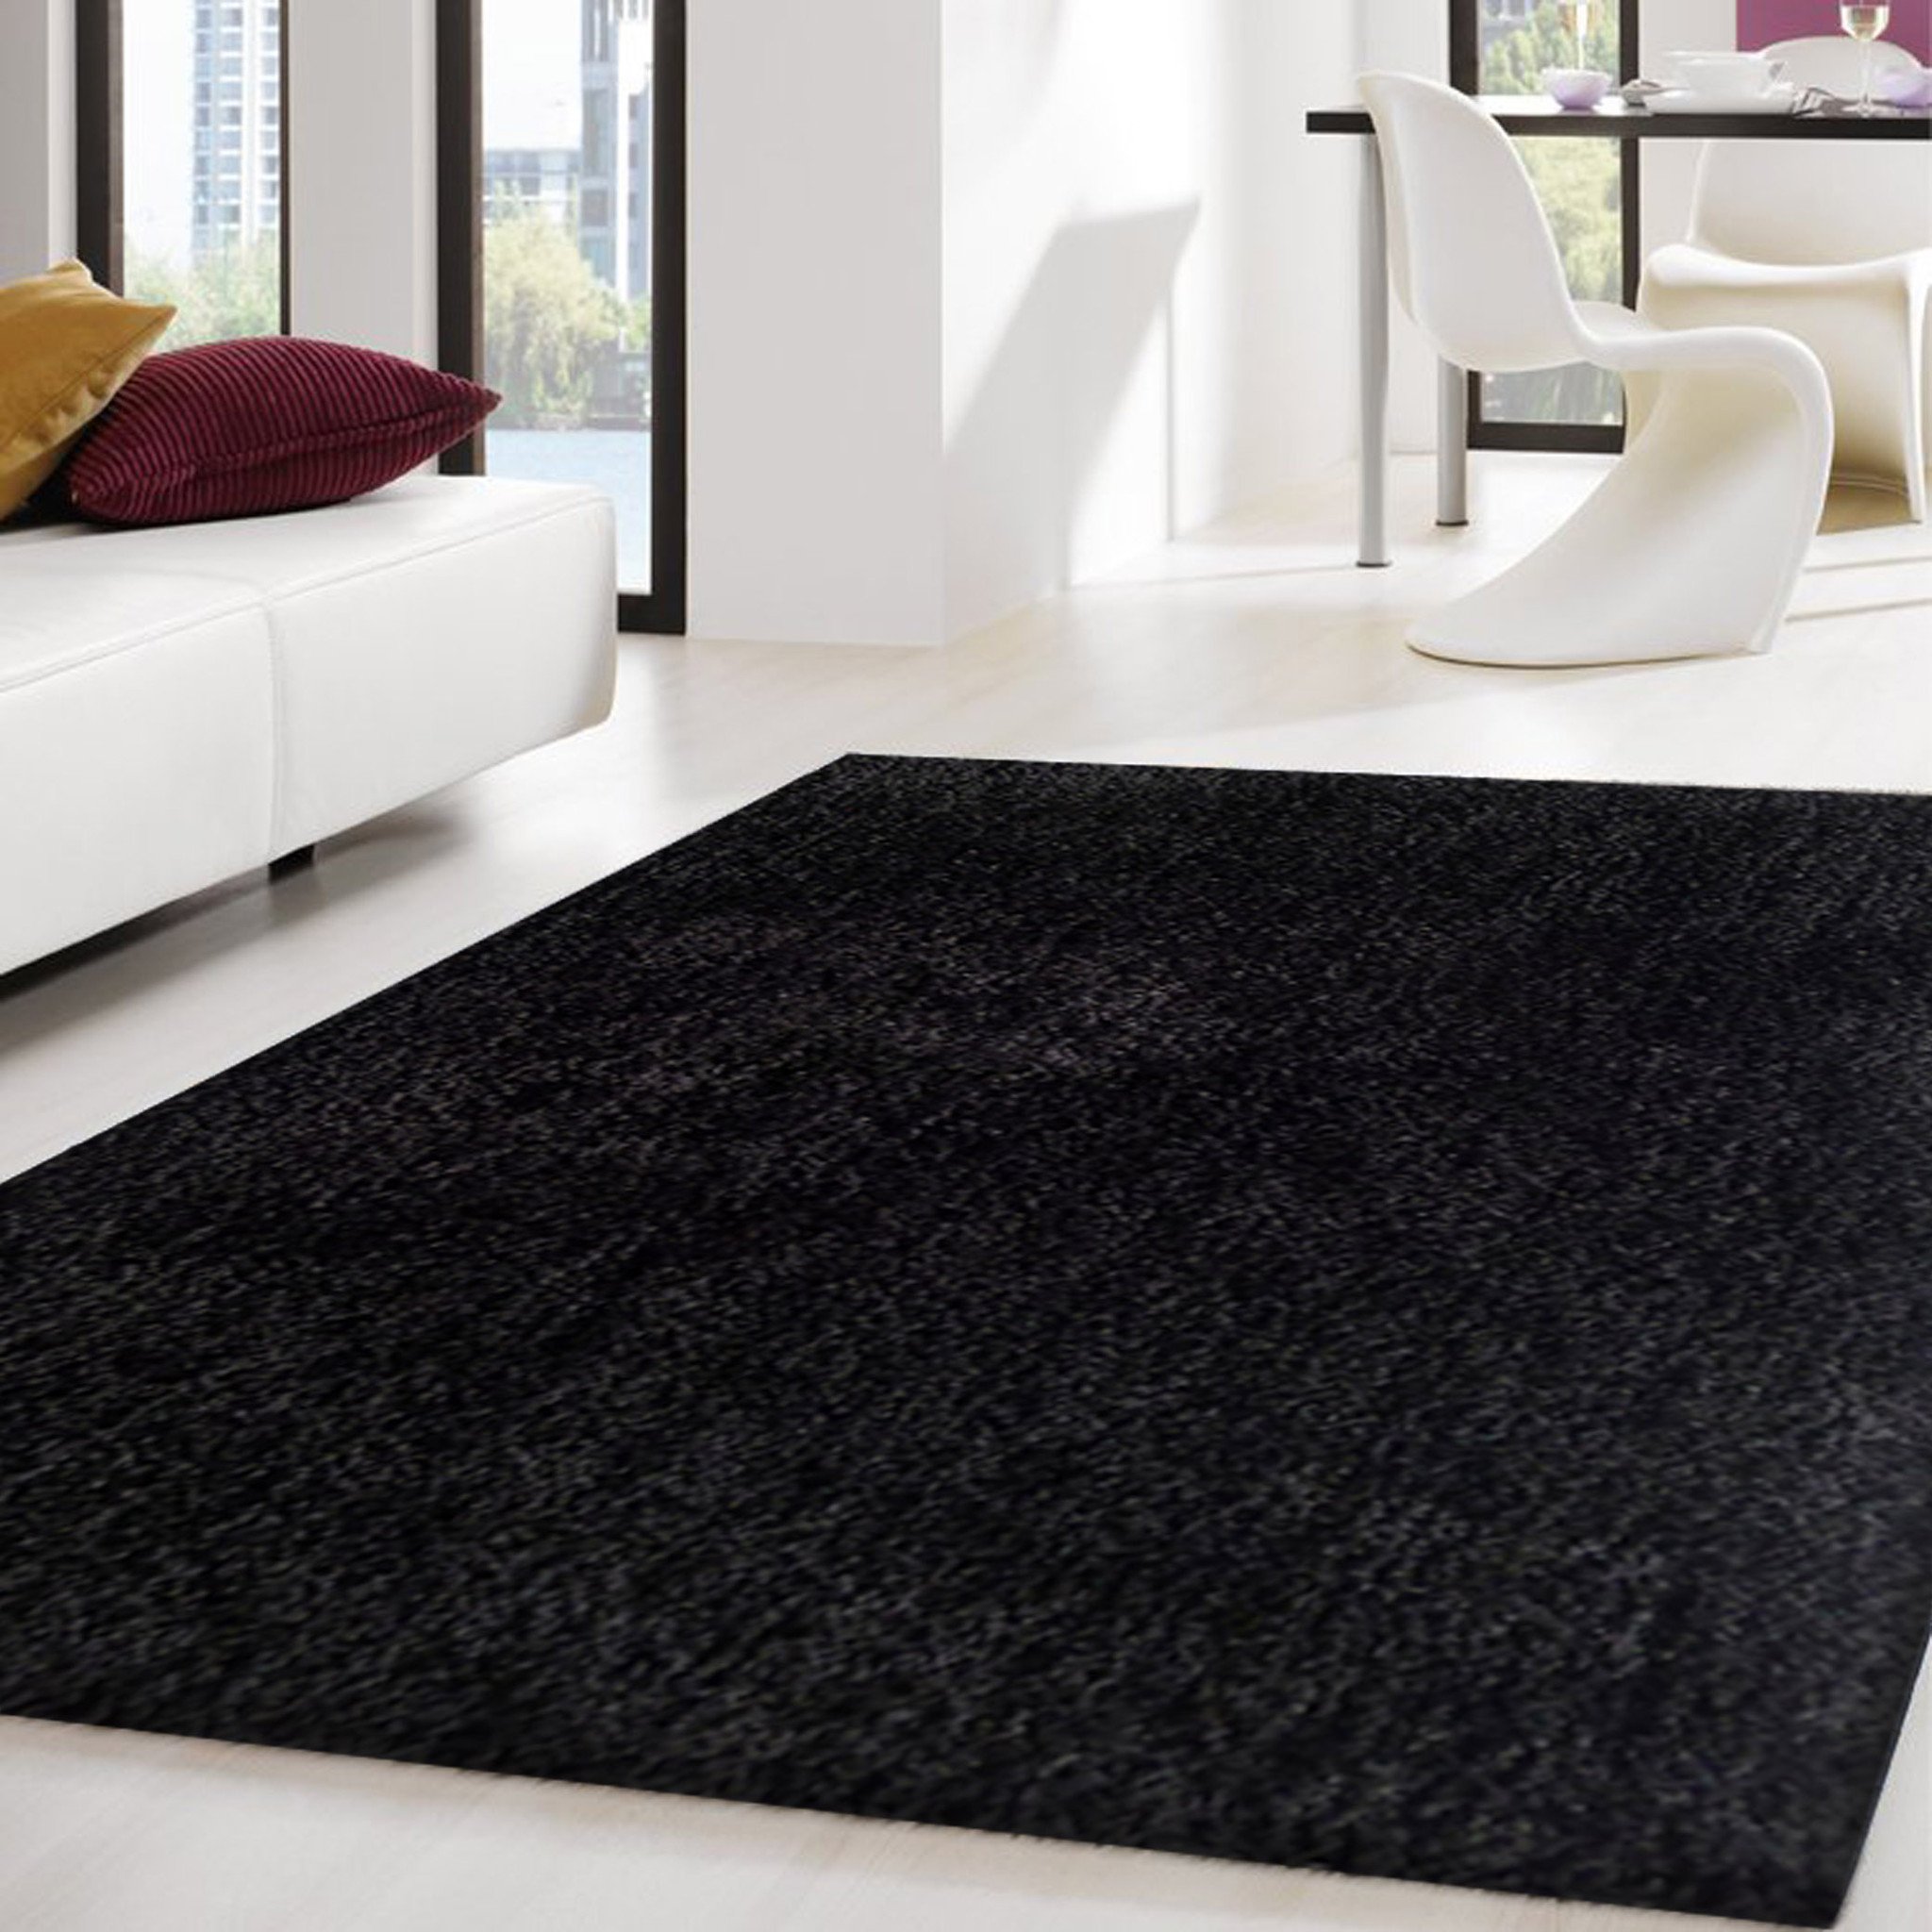 black area rugs 2-piece set | solid black thick plush shag area rug with rug pad LQPQMOU